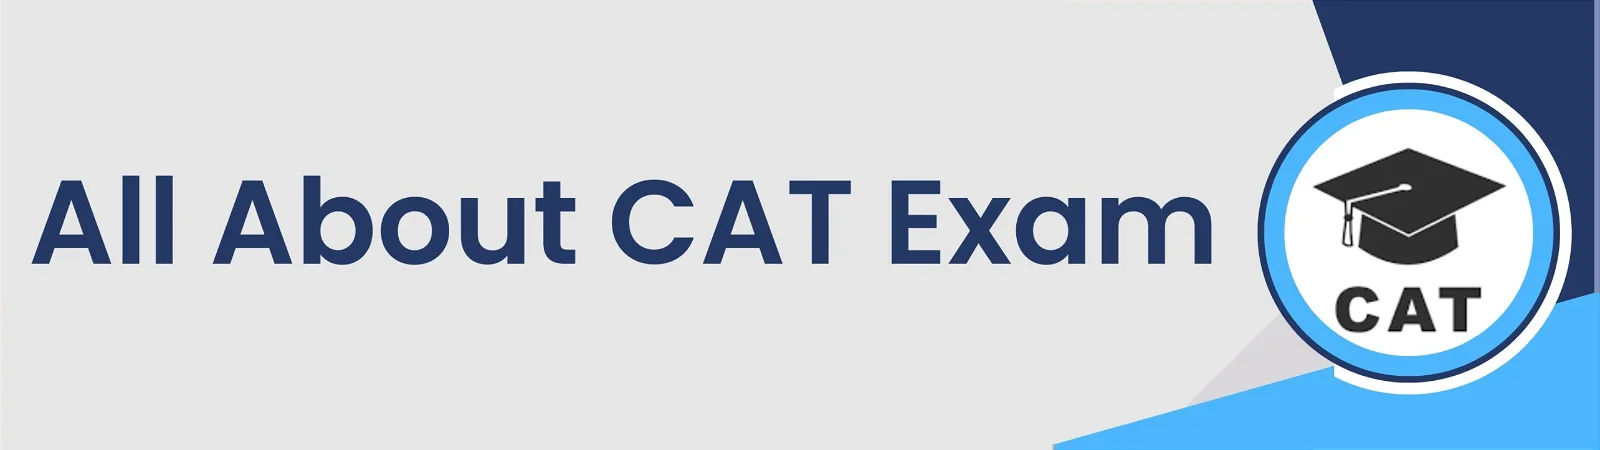 All About CAT Exam